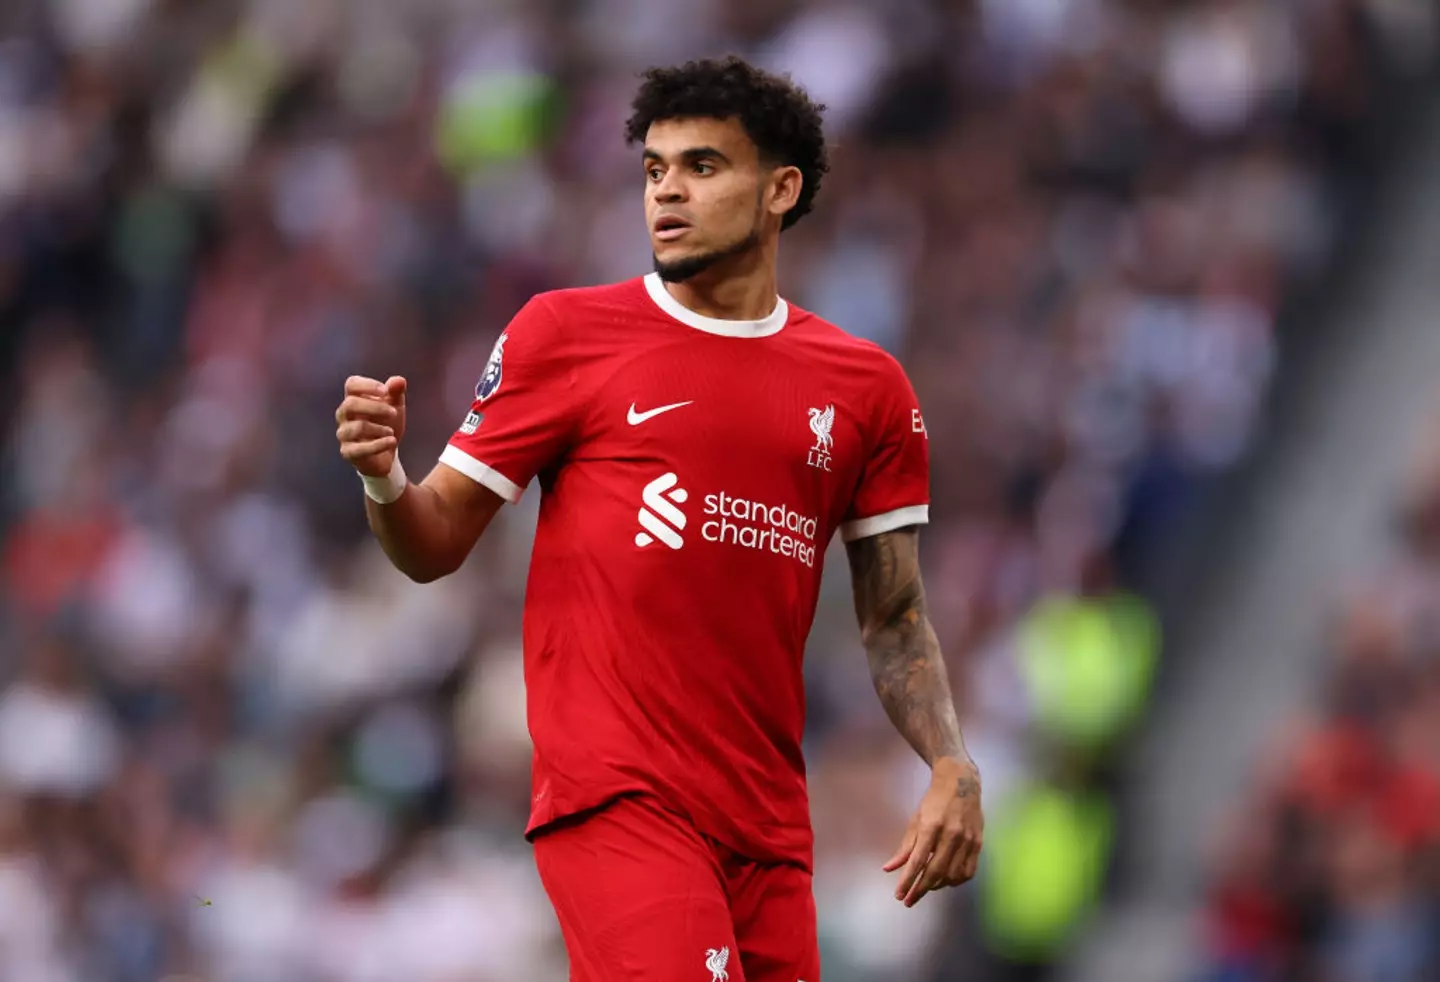 Liverpool winger Luis Diaz had a goal incorrectly ruled out (